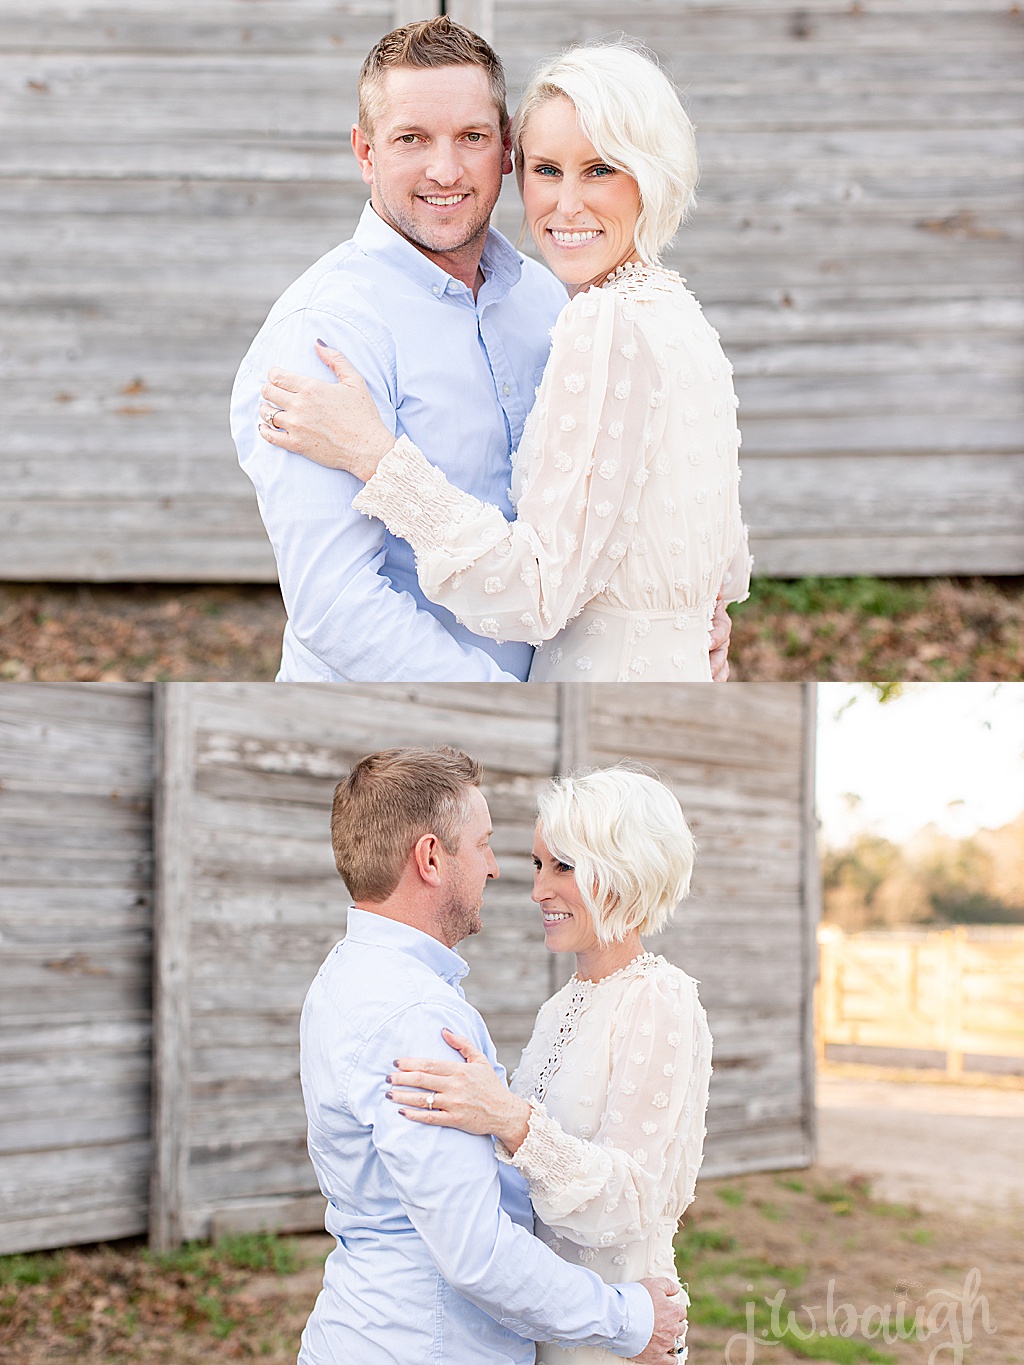 Montgomery engagement session